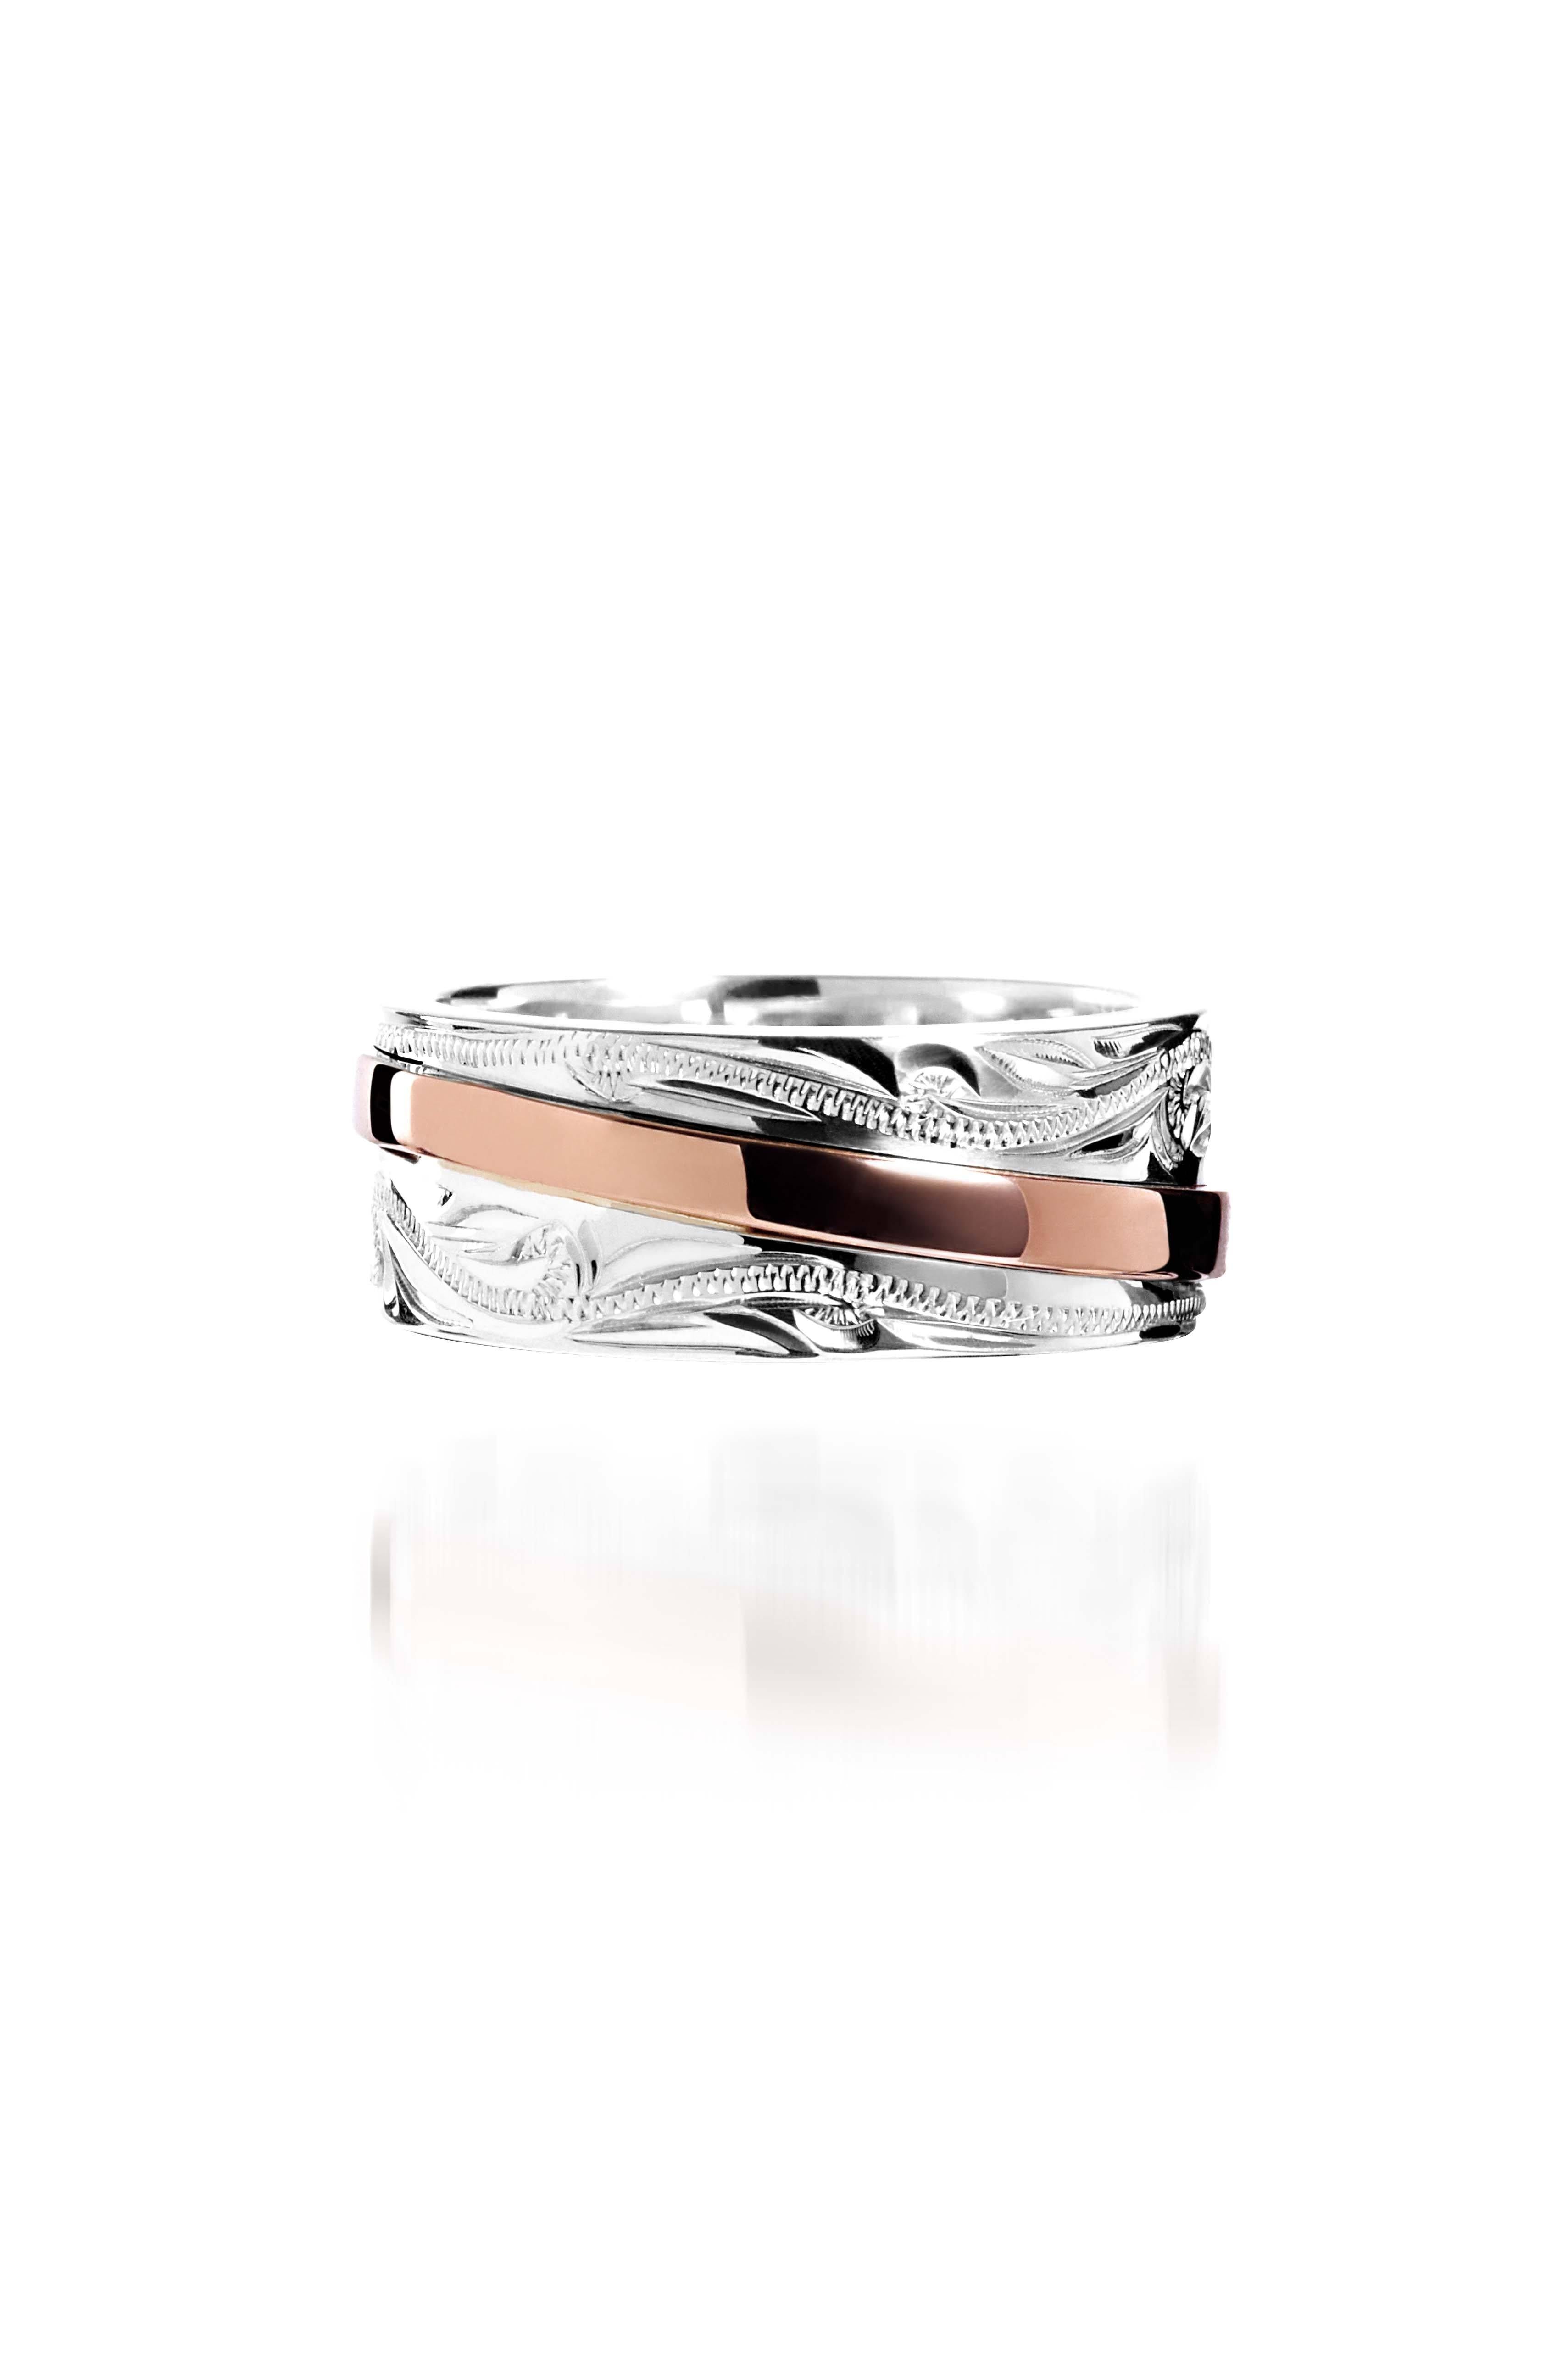 The picture shows a two-tone 925 sterling silver and 14K rose gold belted ring with hand-engravings.